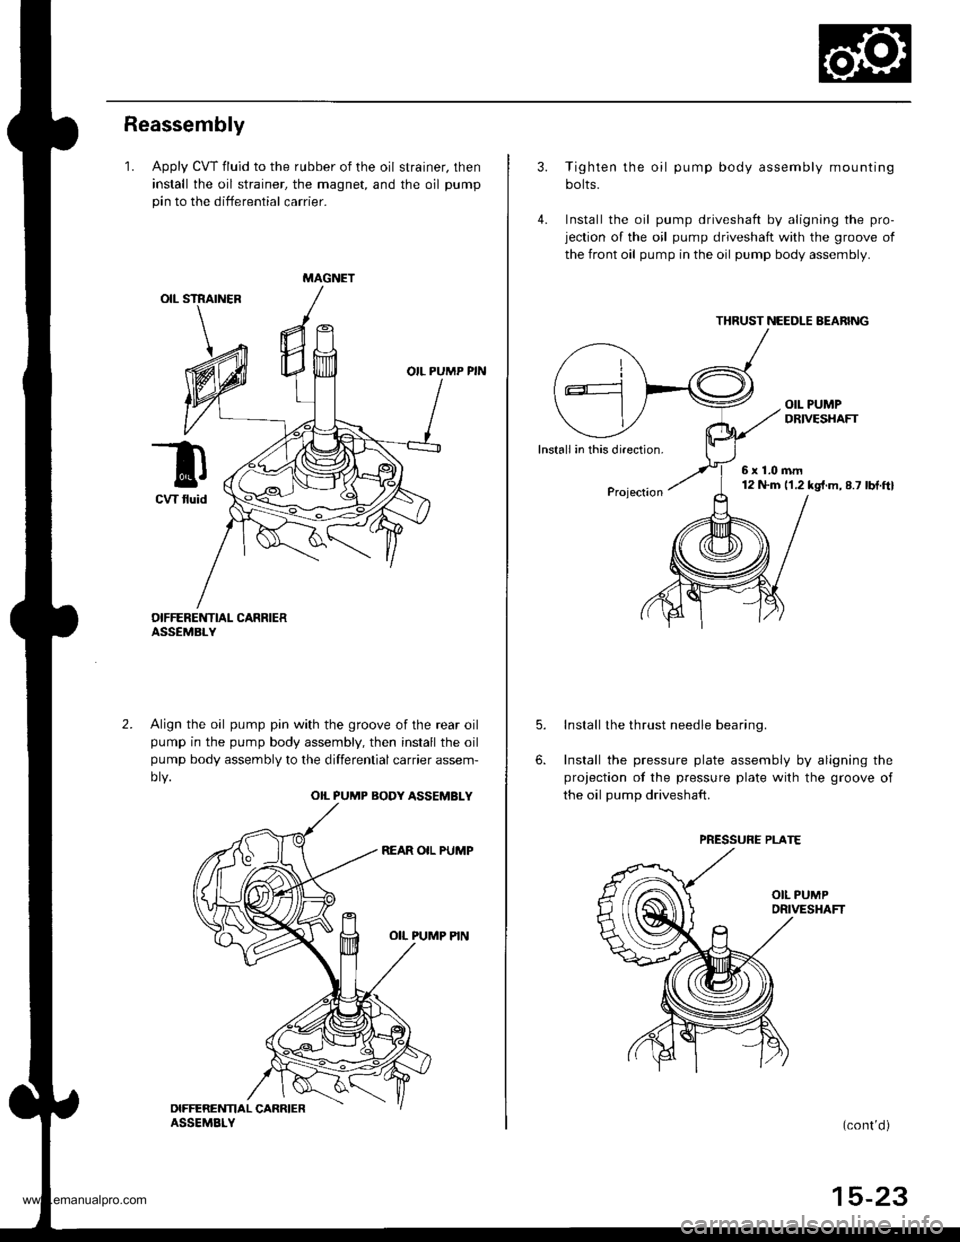 HONDA CR-V 1998 RD1-RD3 / 1.G Repair Manual 
Reassembly
1. Apply CVT fluid to the rubber of the oil strainer, then
install the oil strainer, the magnet, and the oil pump
pin to the differential carrier.
OIL PUMP PIN
DIFFERE]TTIAL CARRIERASSEMBL